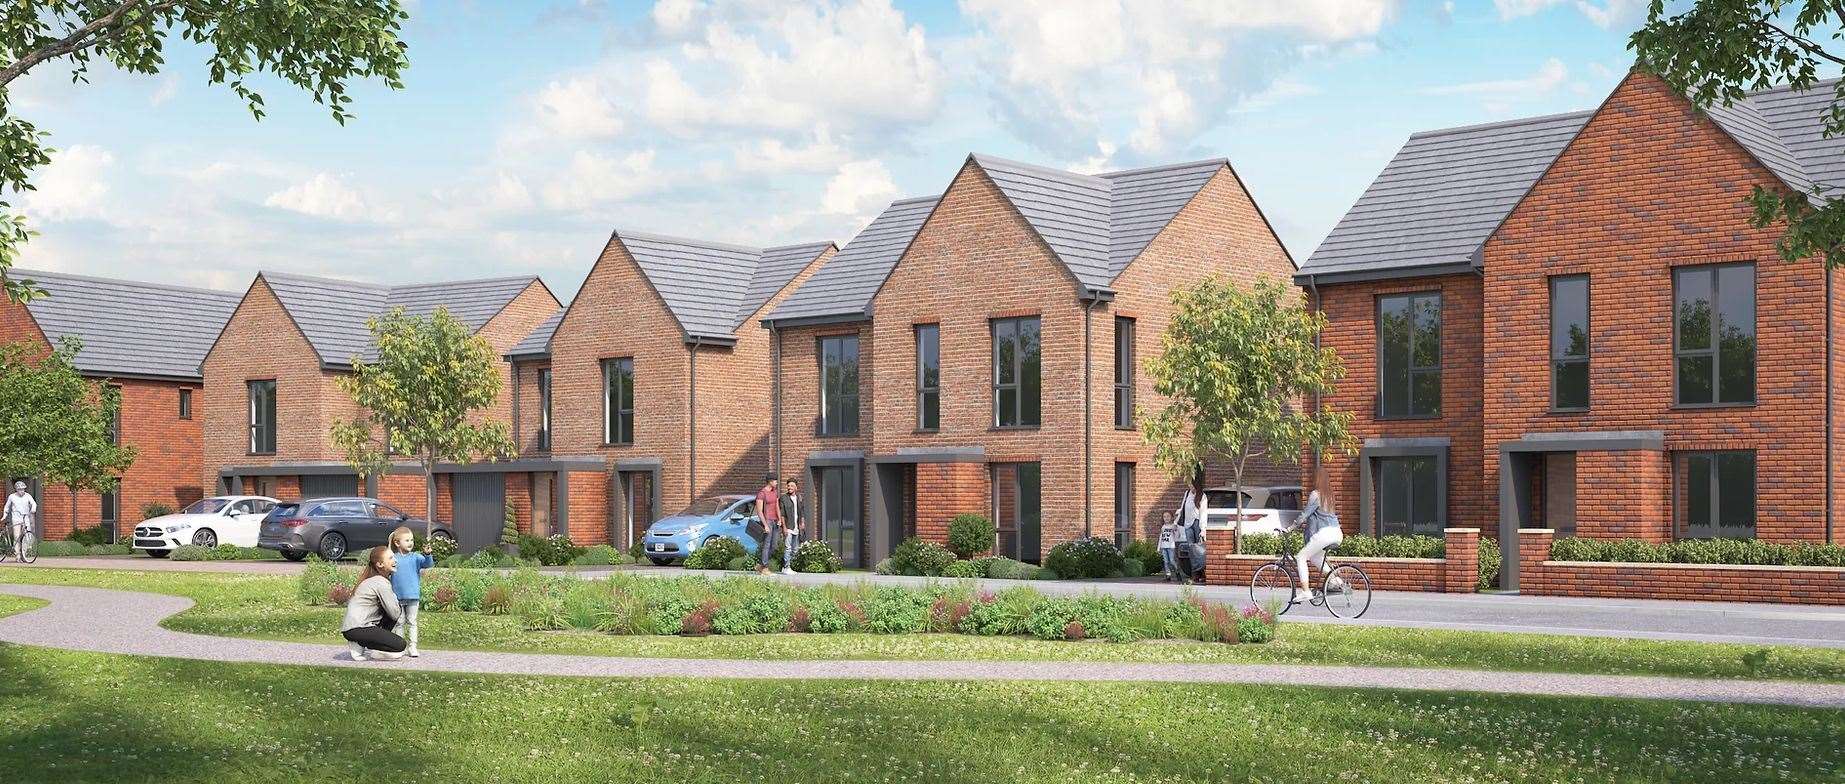 The homes will be built between Manston Court Road and Haine Road. Picture: Rooksmead